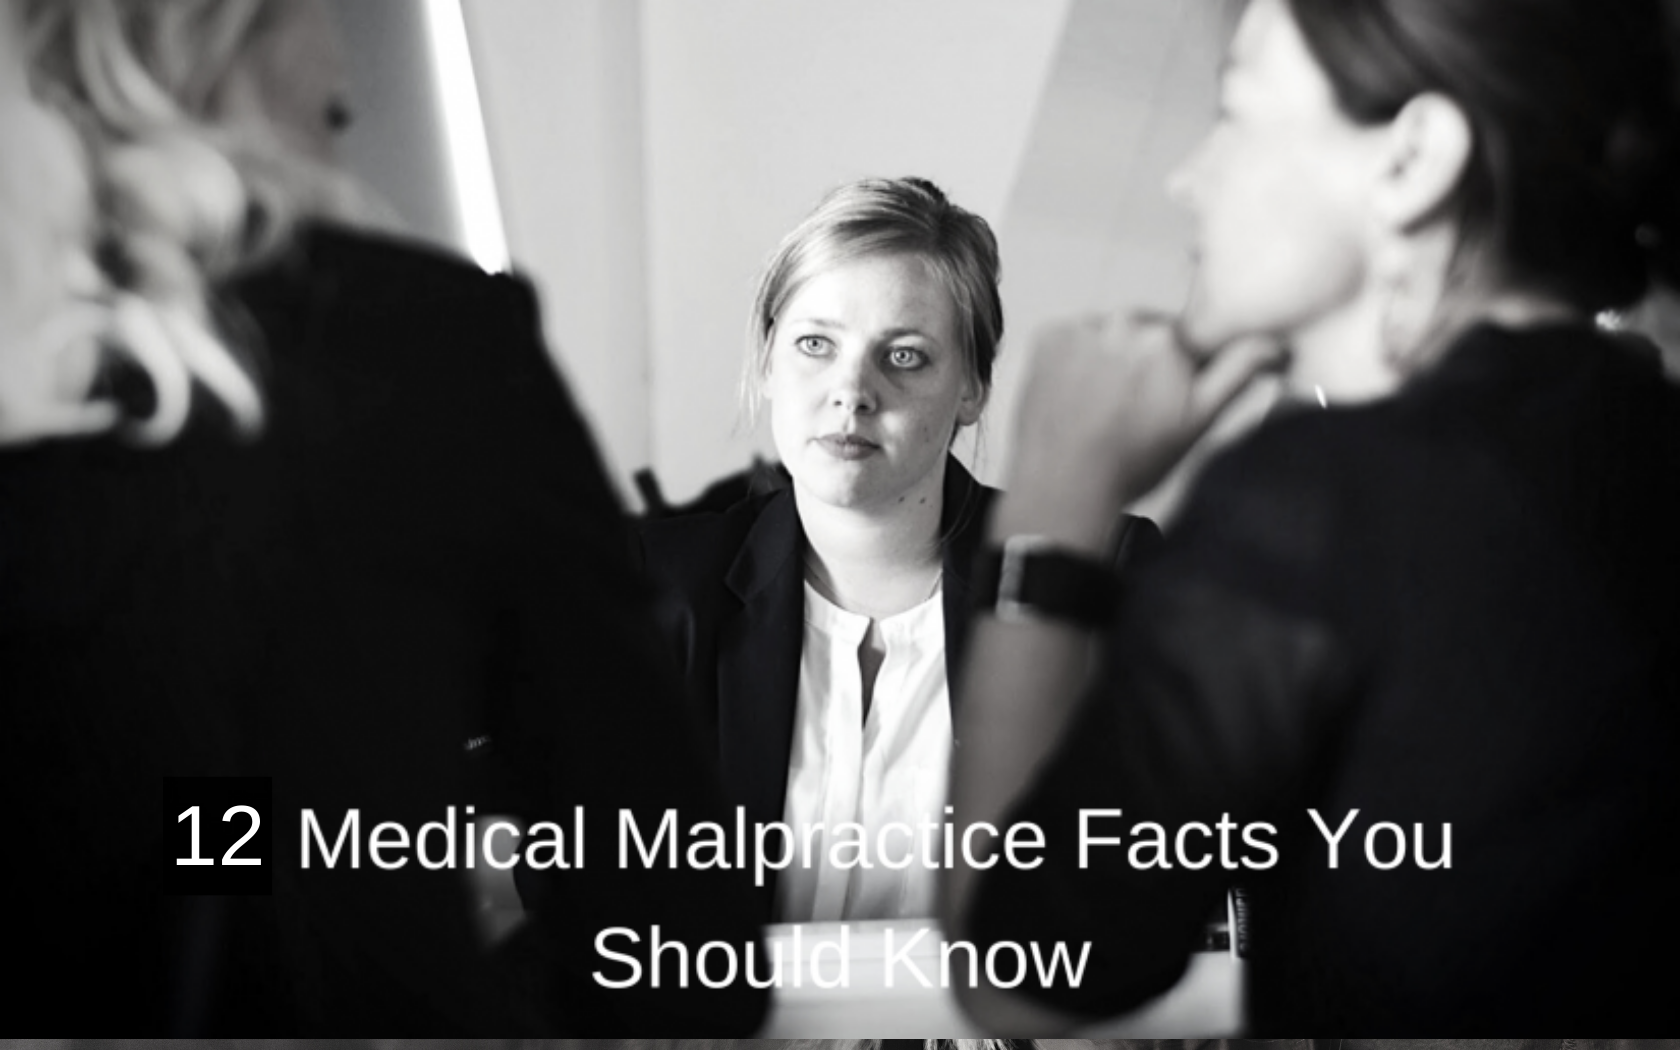 Group of lawyers talking, with caption "12 Medical Malpractice Facts."